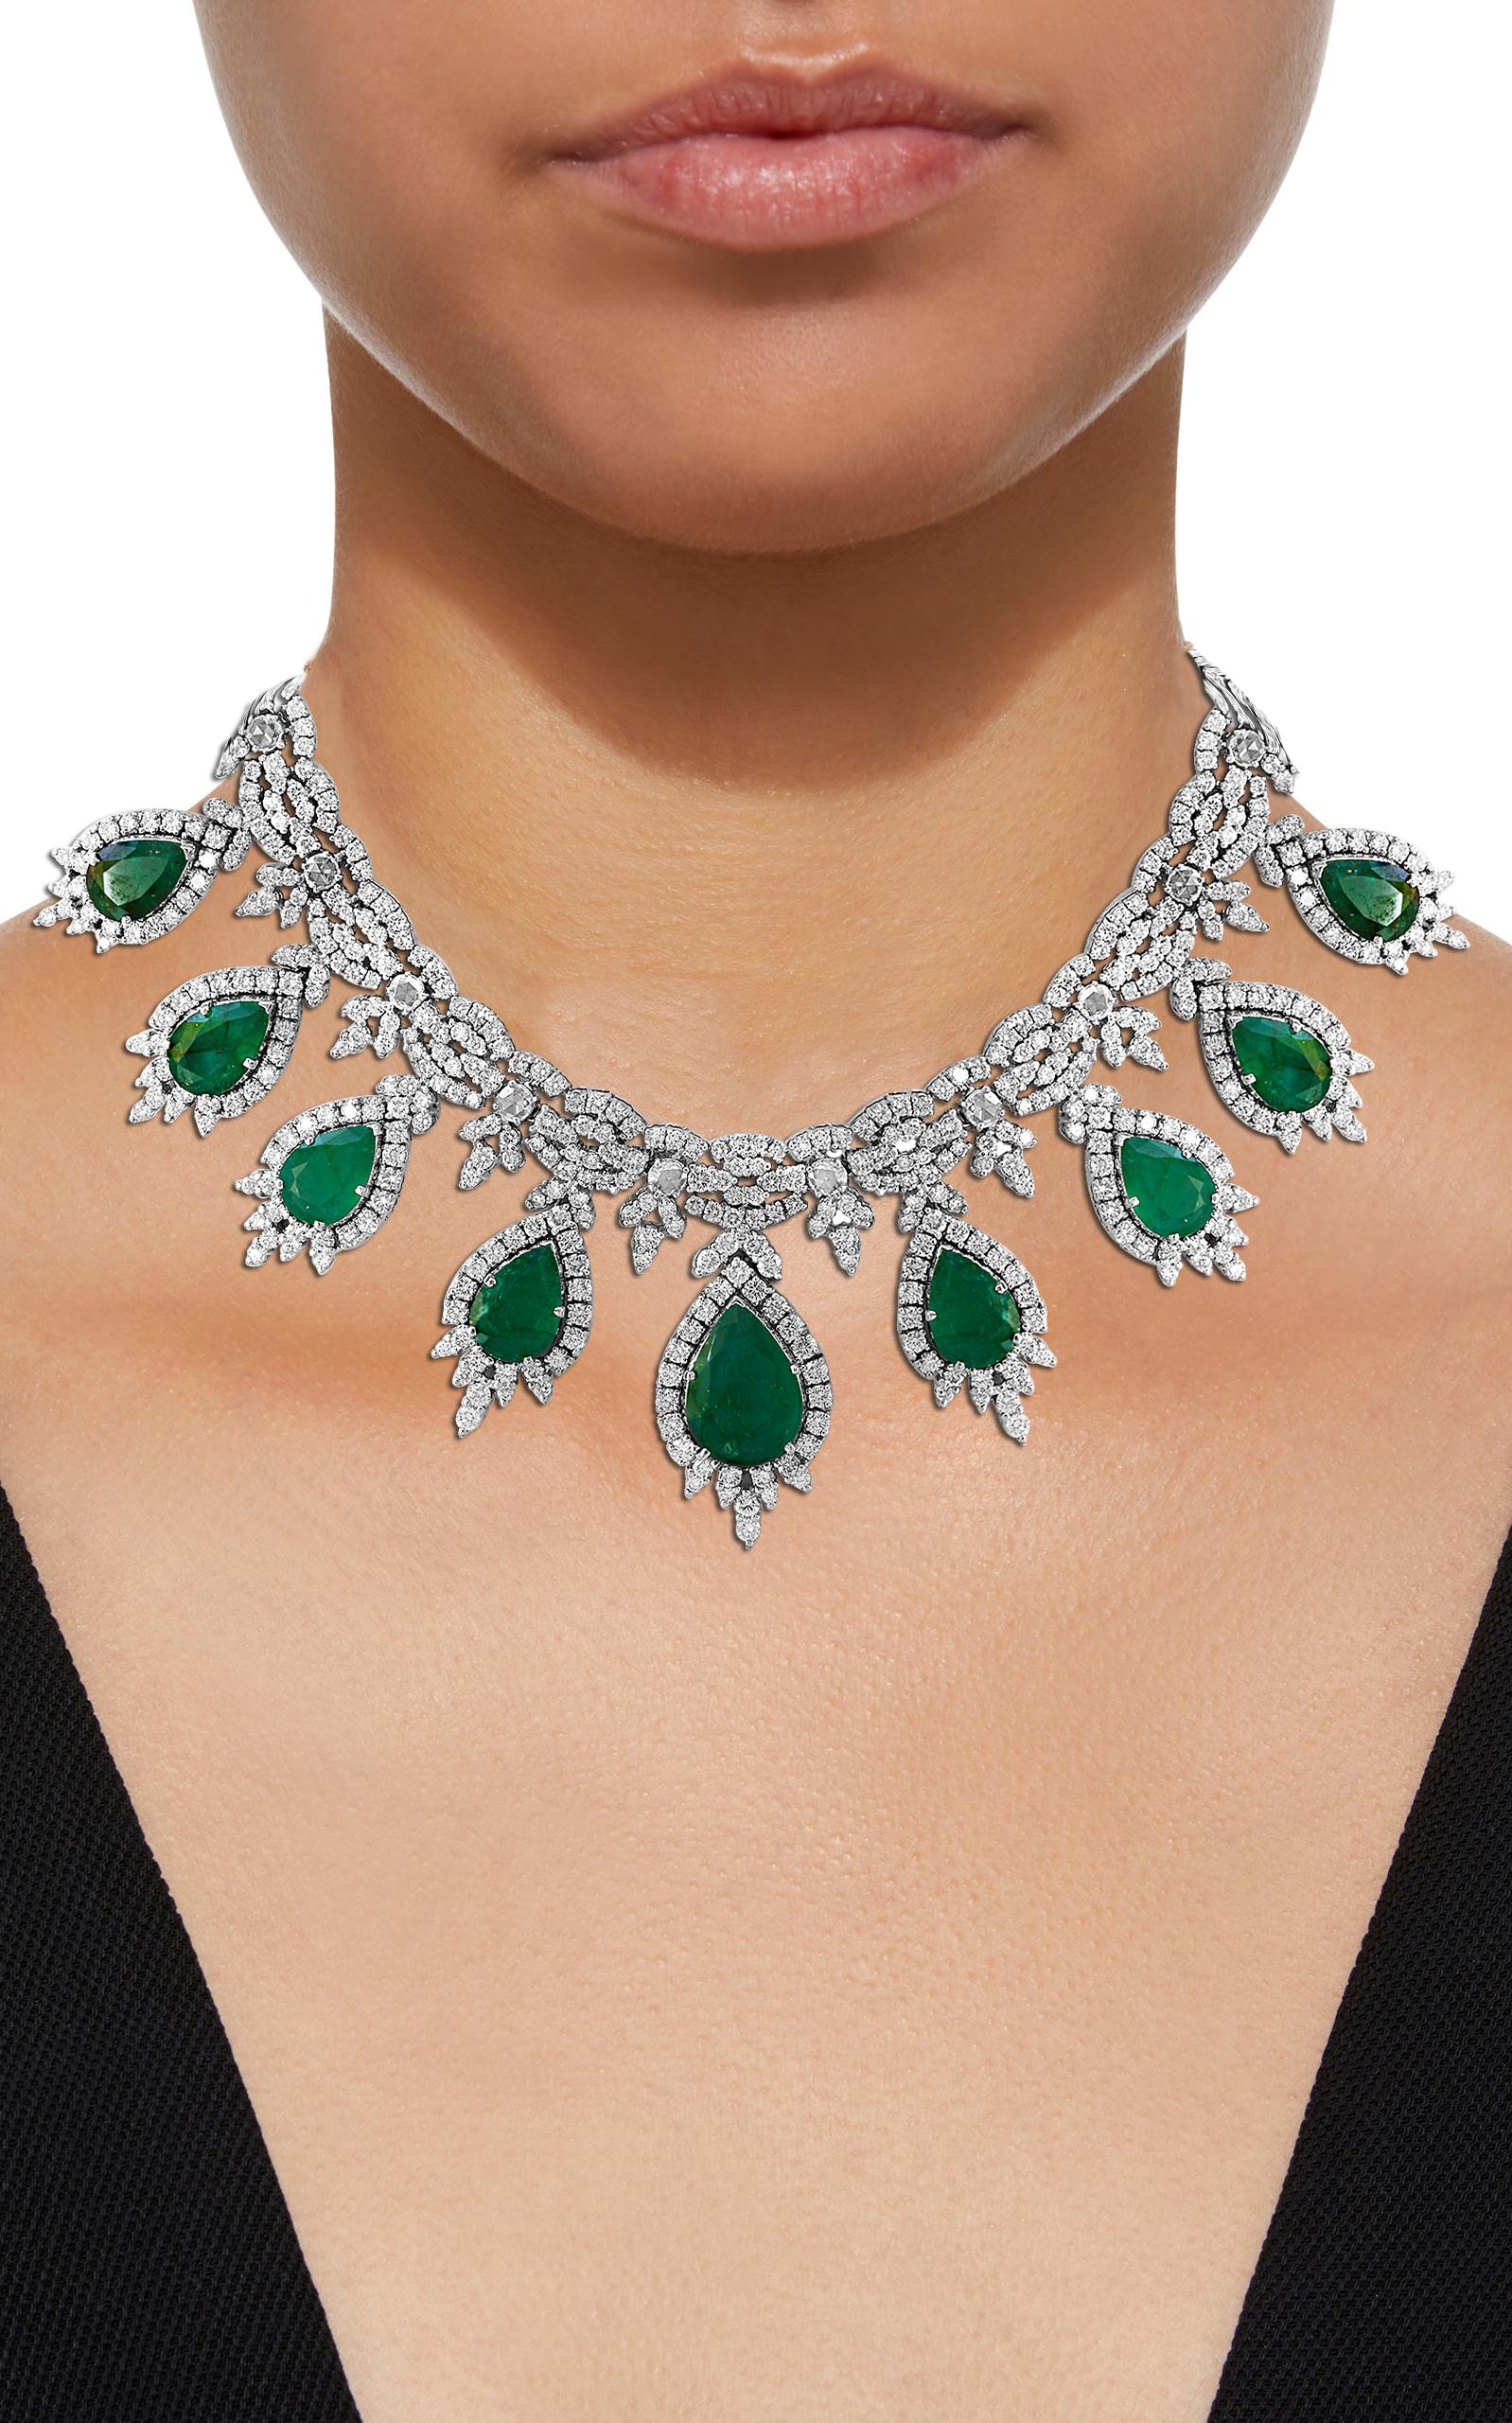 GIA Certified Pear Shape Emerald and Diamond Necklace and Earring Bridal Suite 2